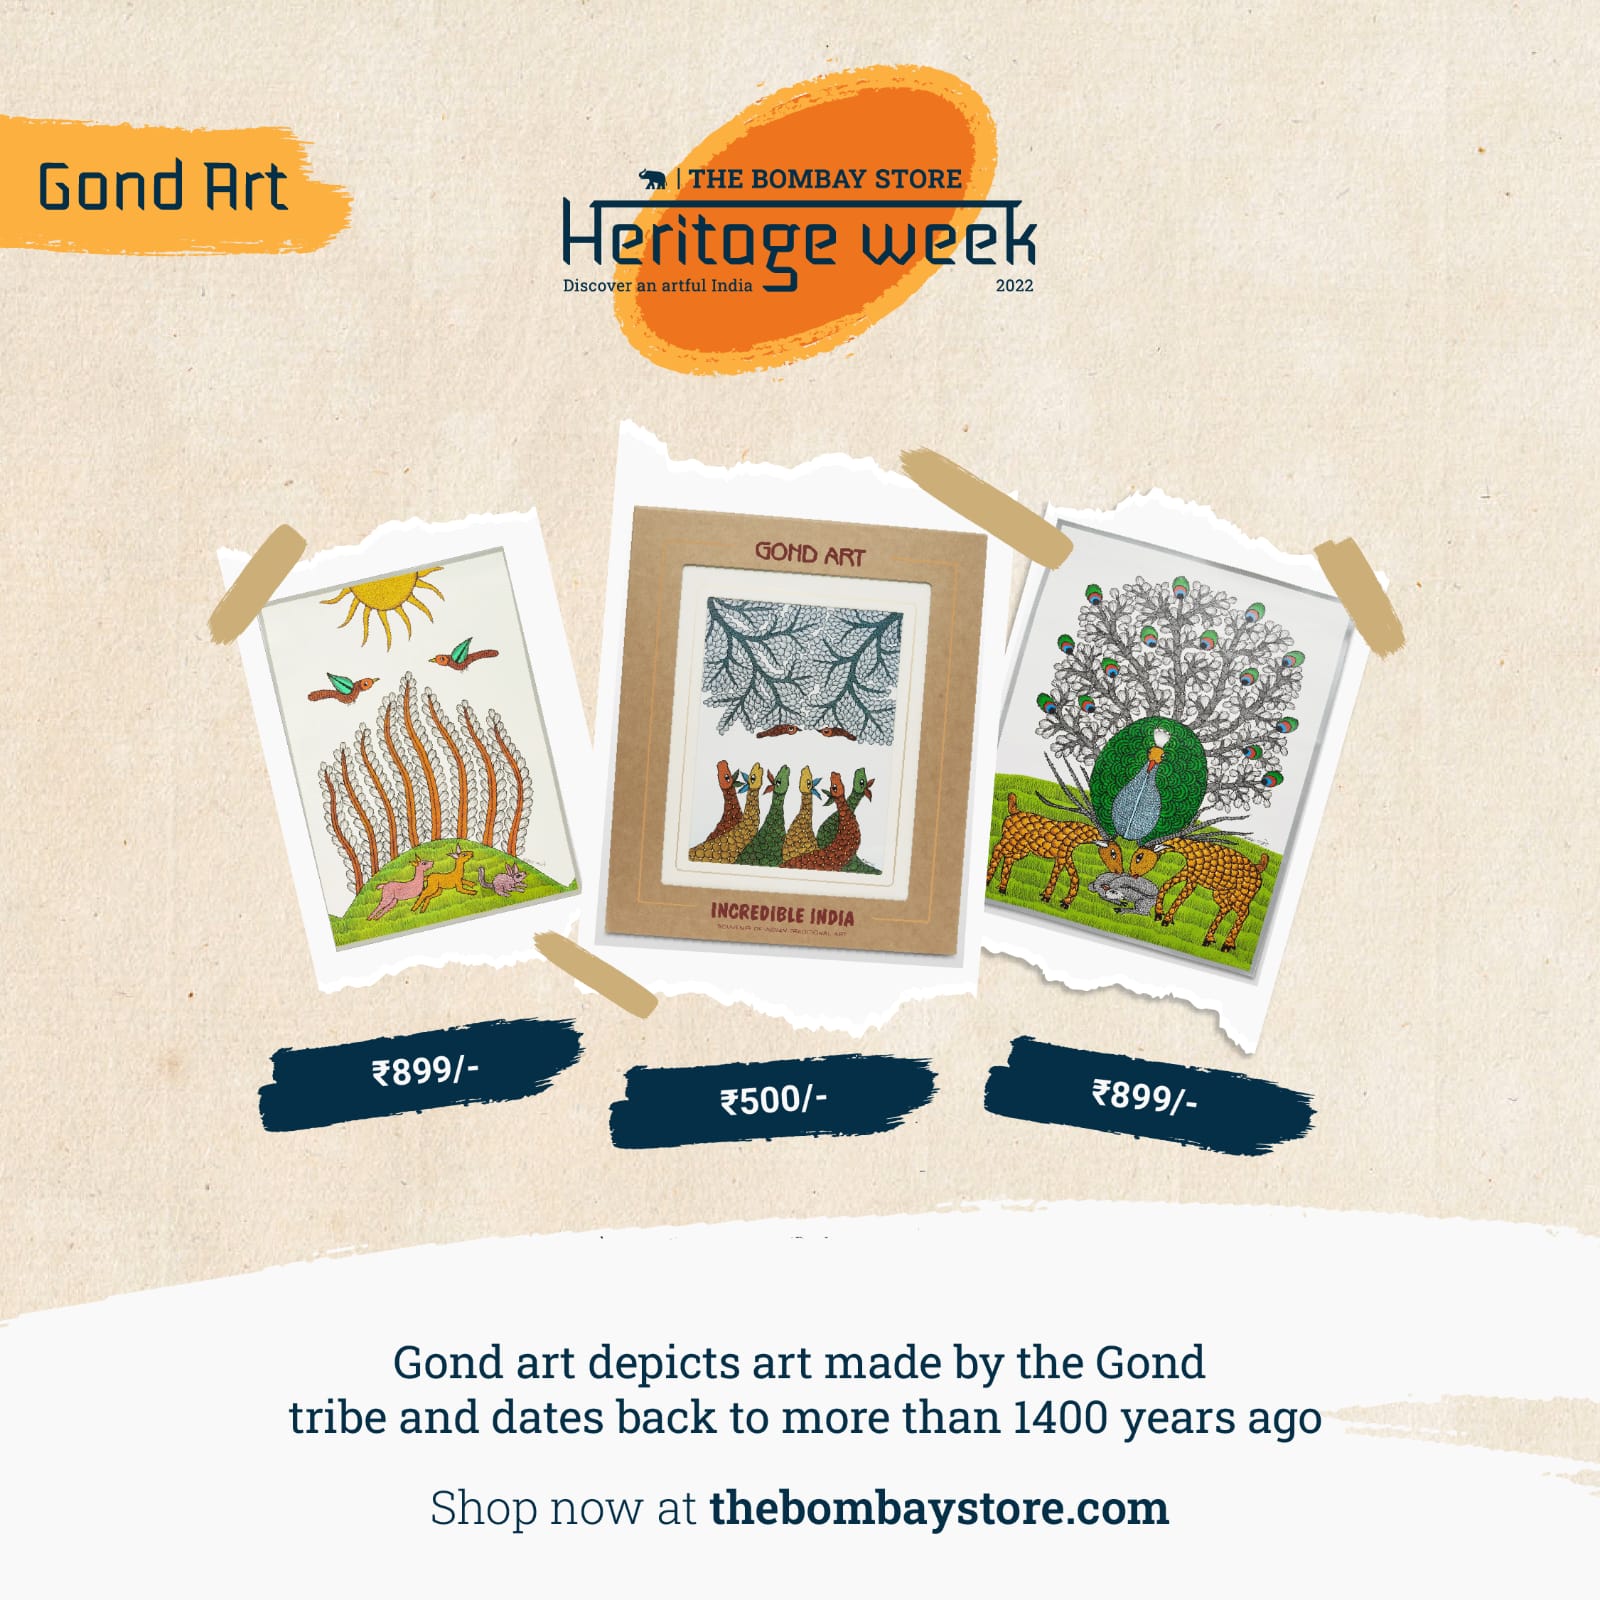 Gond Art in the products of The Bombay Store